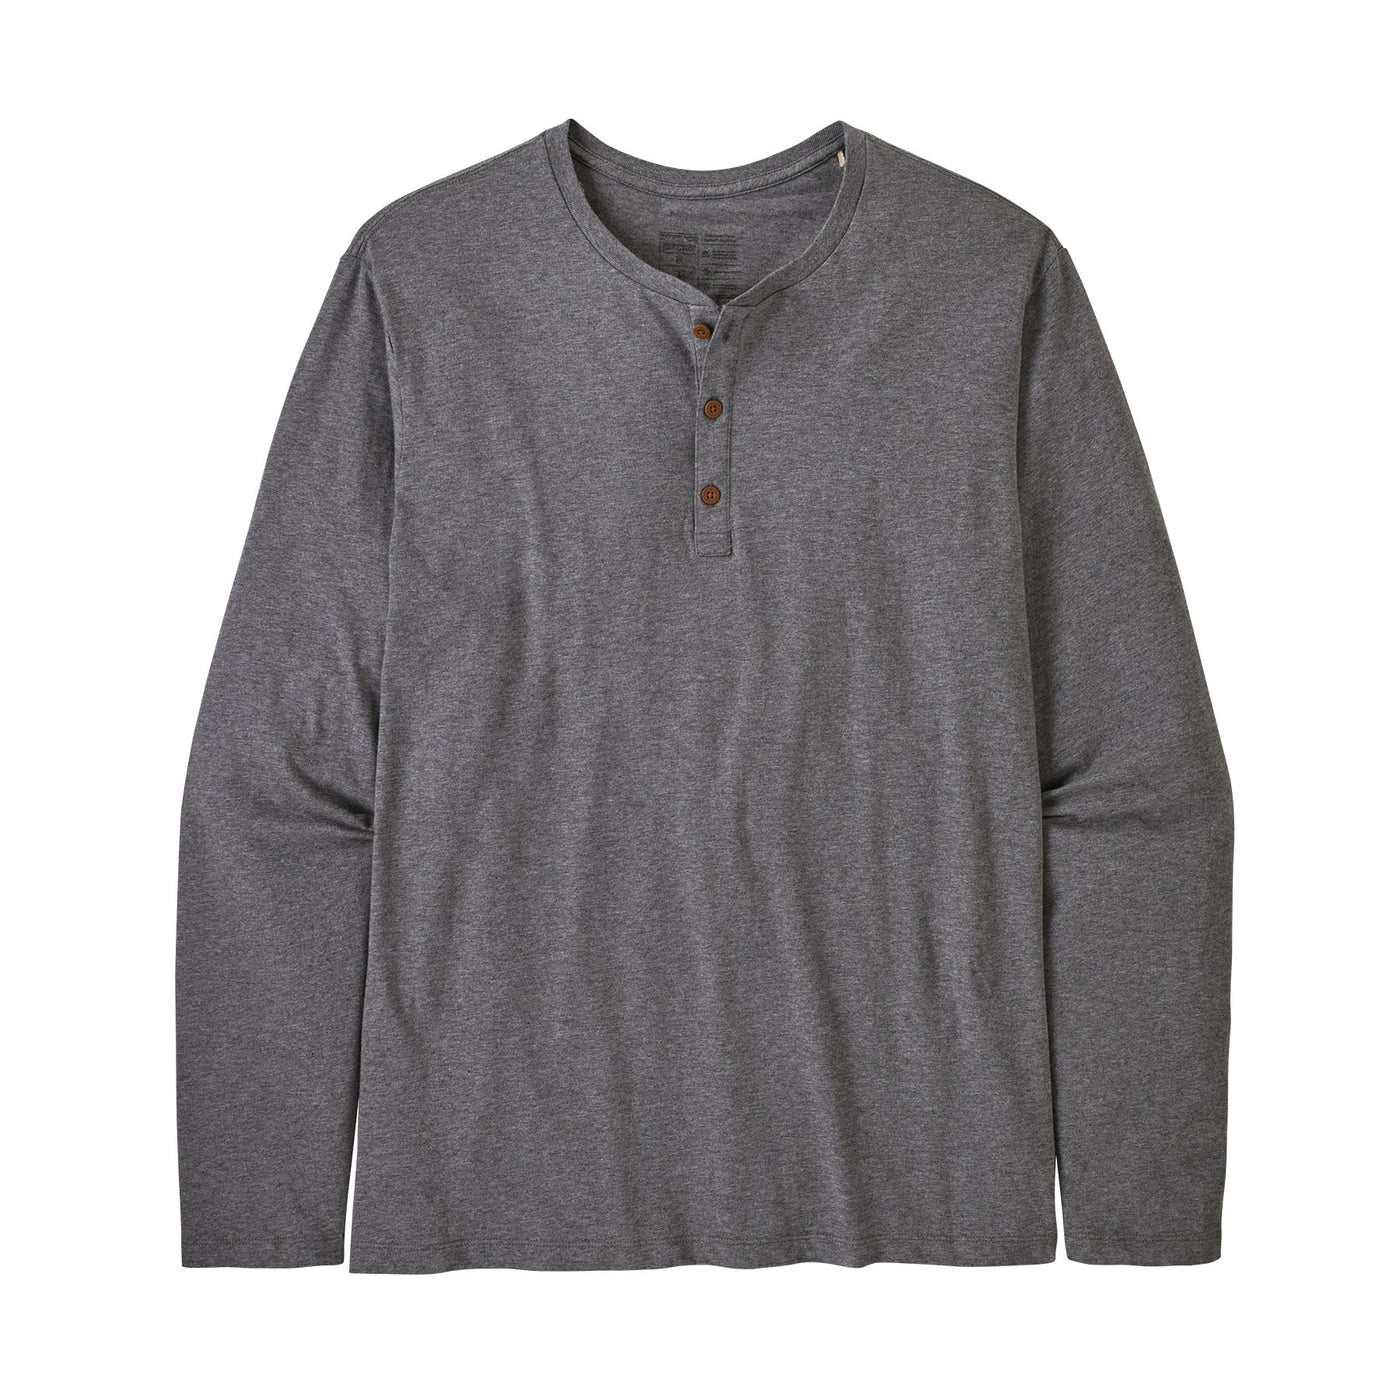 PATAGONIA Men's Regenerative Organic Certified Cotton Lightweight Henley Noble Grey NGRY